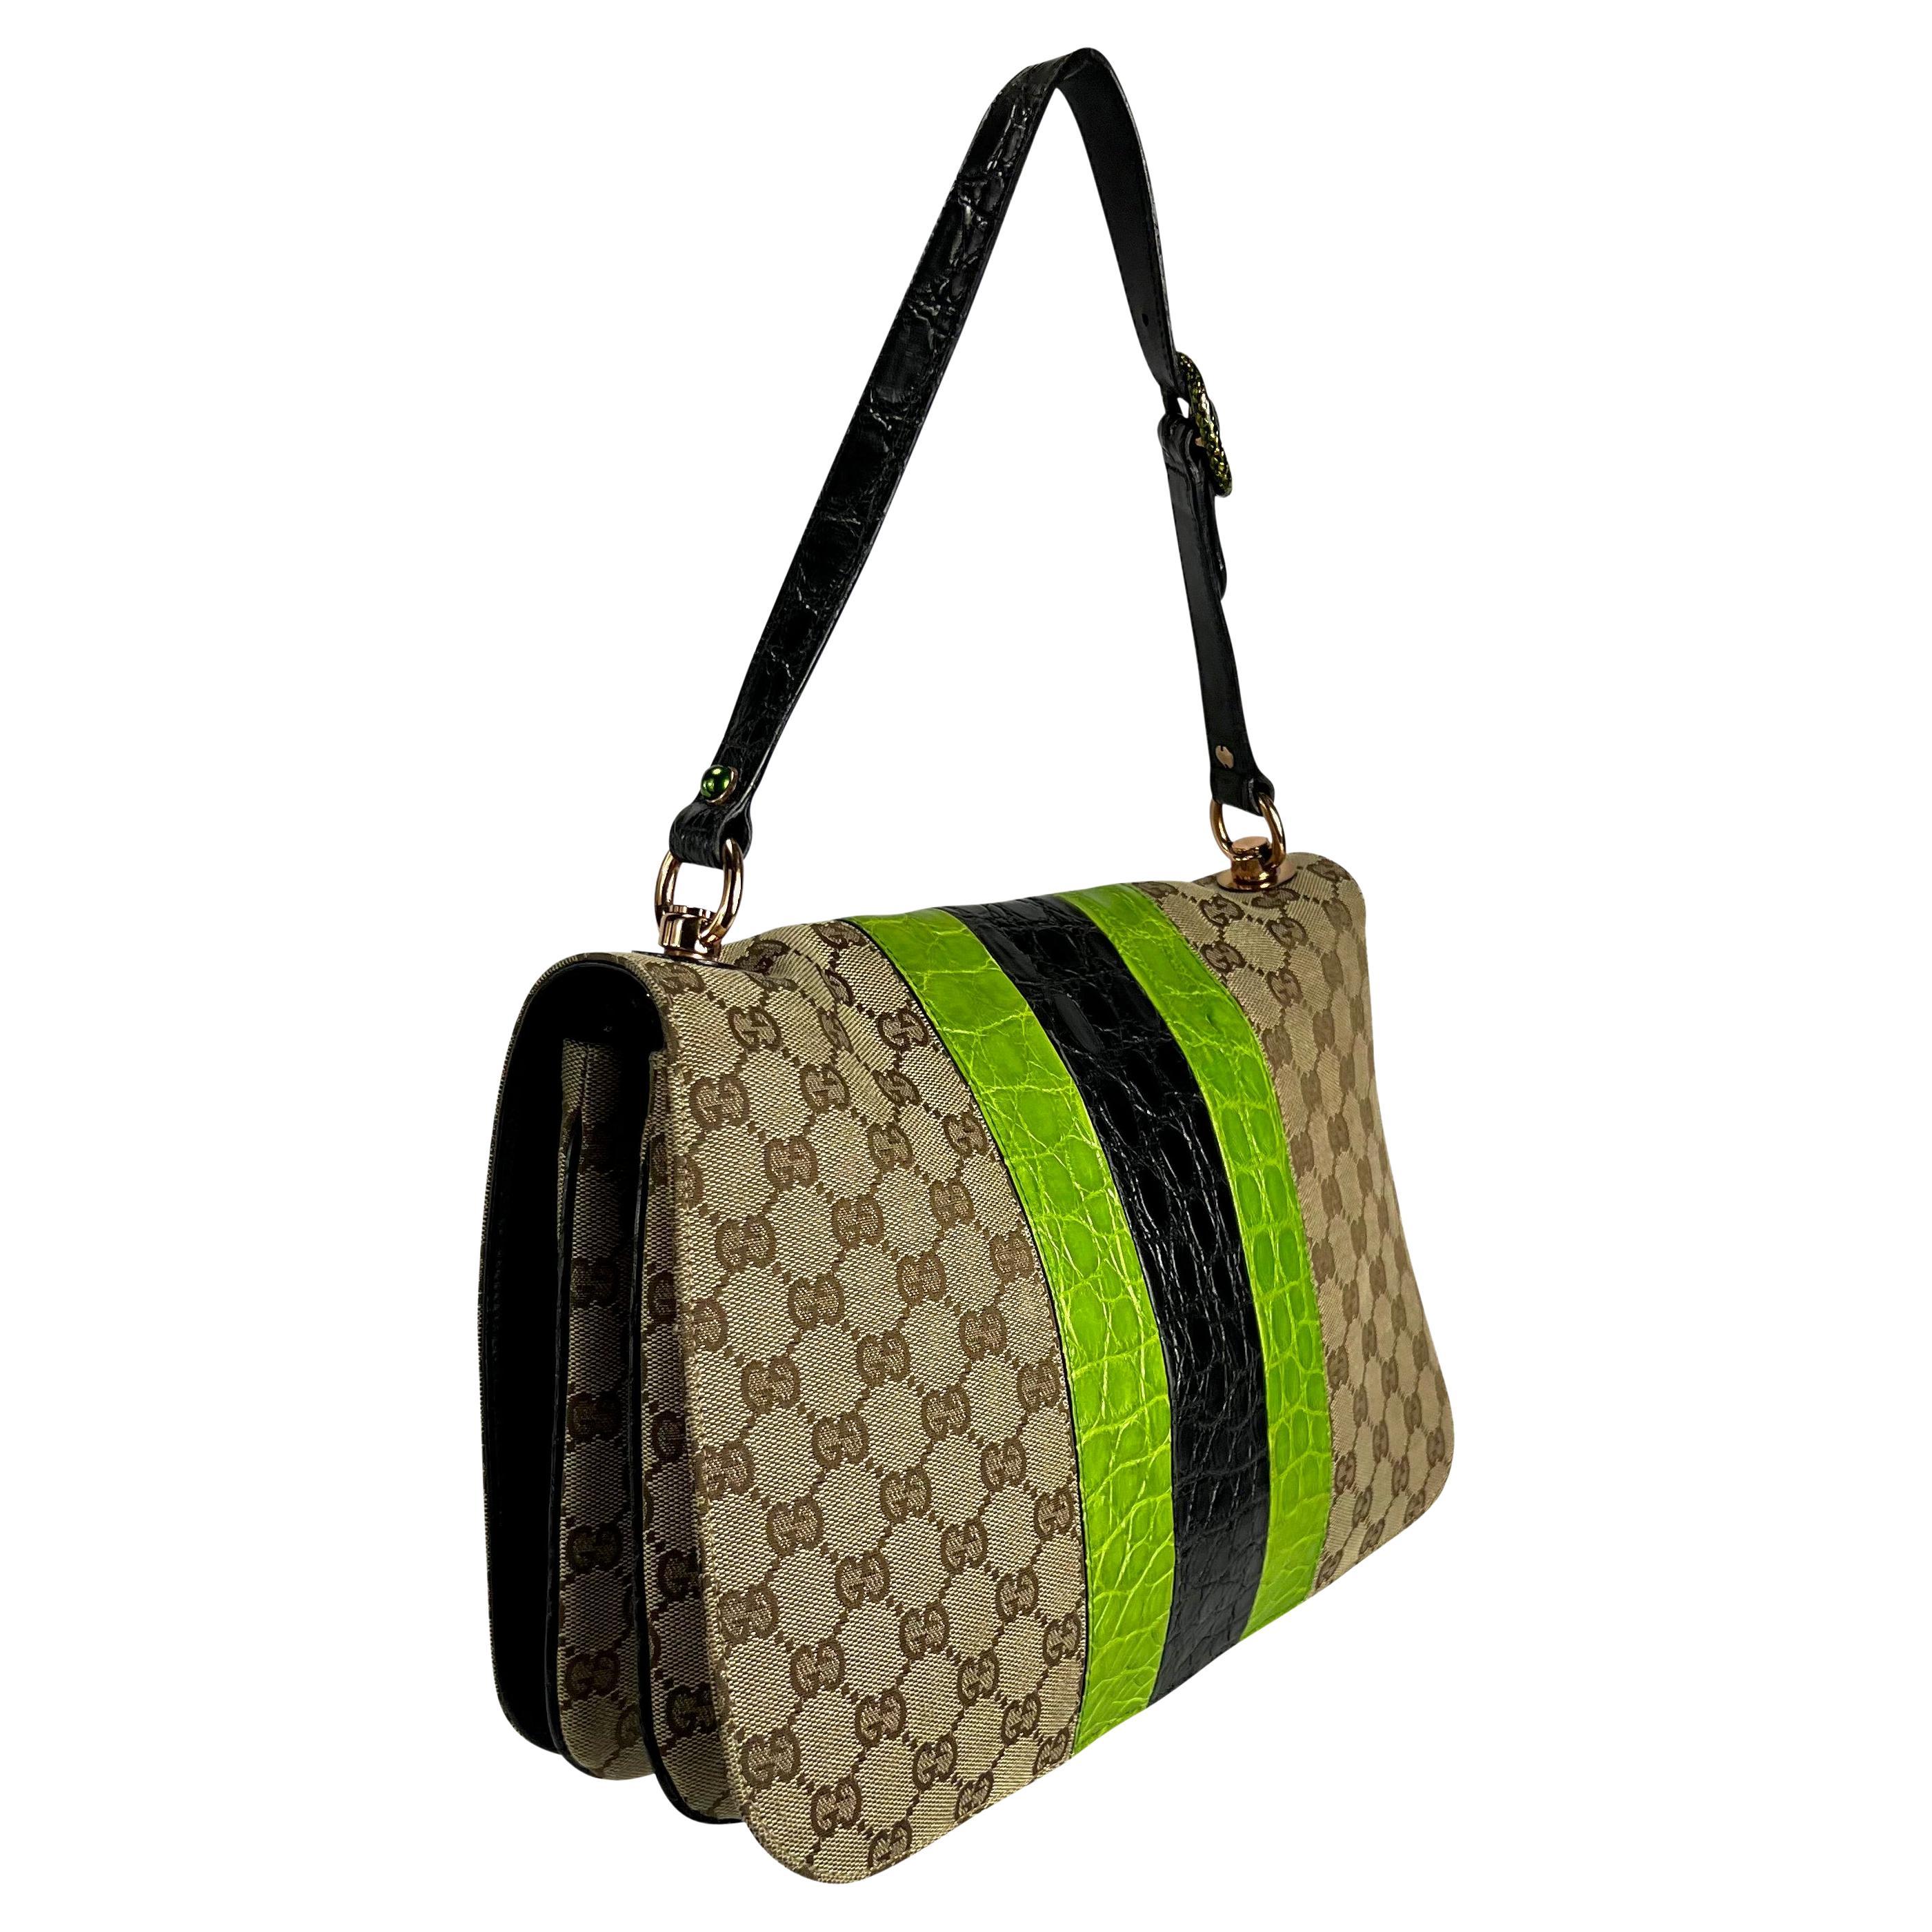 Women's S/S 2004 Gucci by Tom Ford Green Crocodile Accented GG Canvas Snake Shoulder Bag